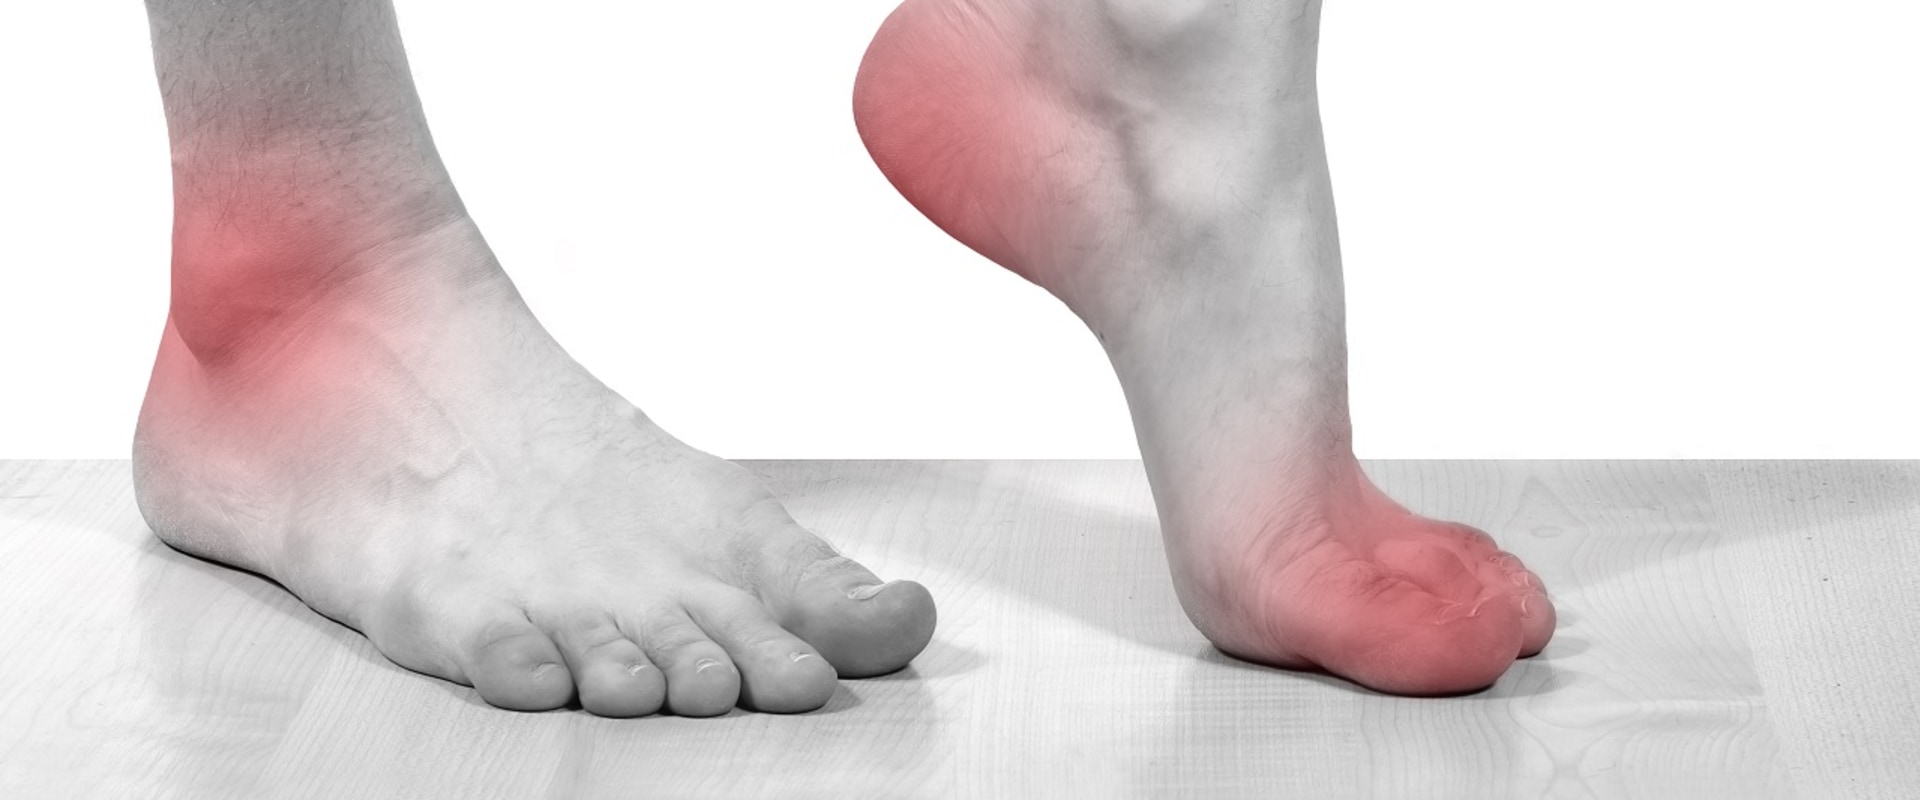 Can you rub cbd oil on your feet for neuropathy?